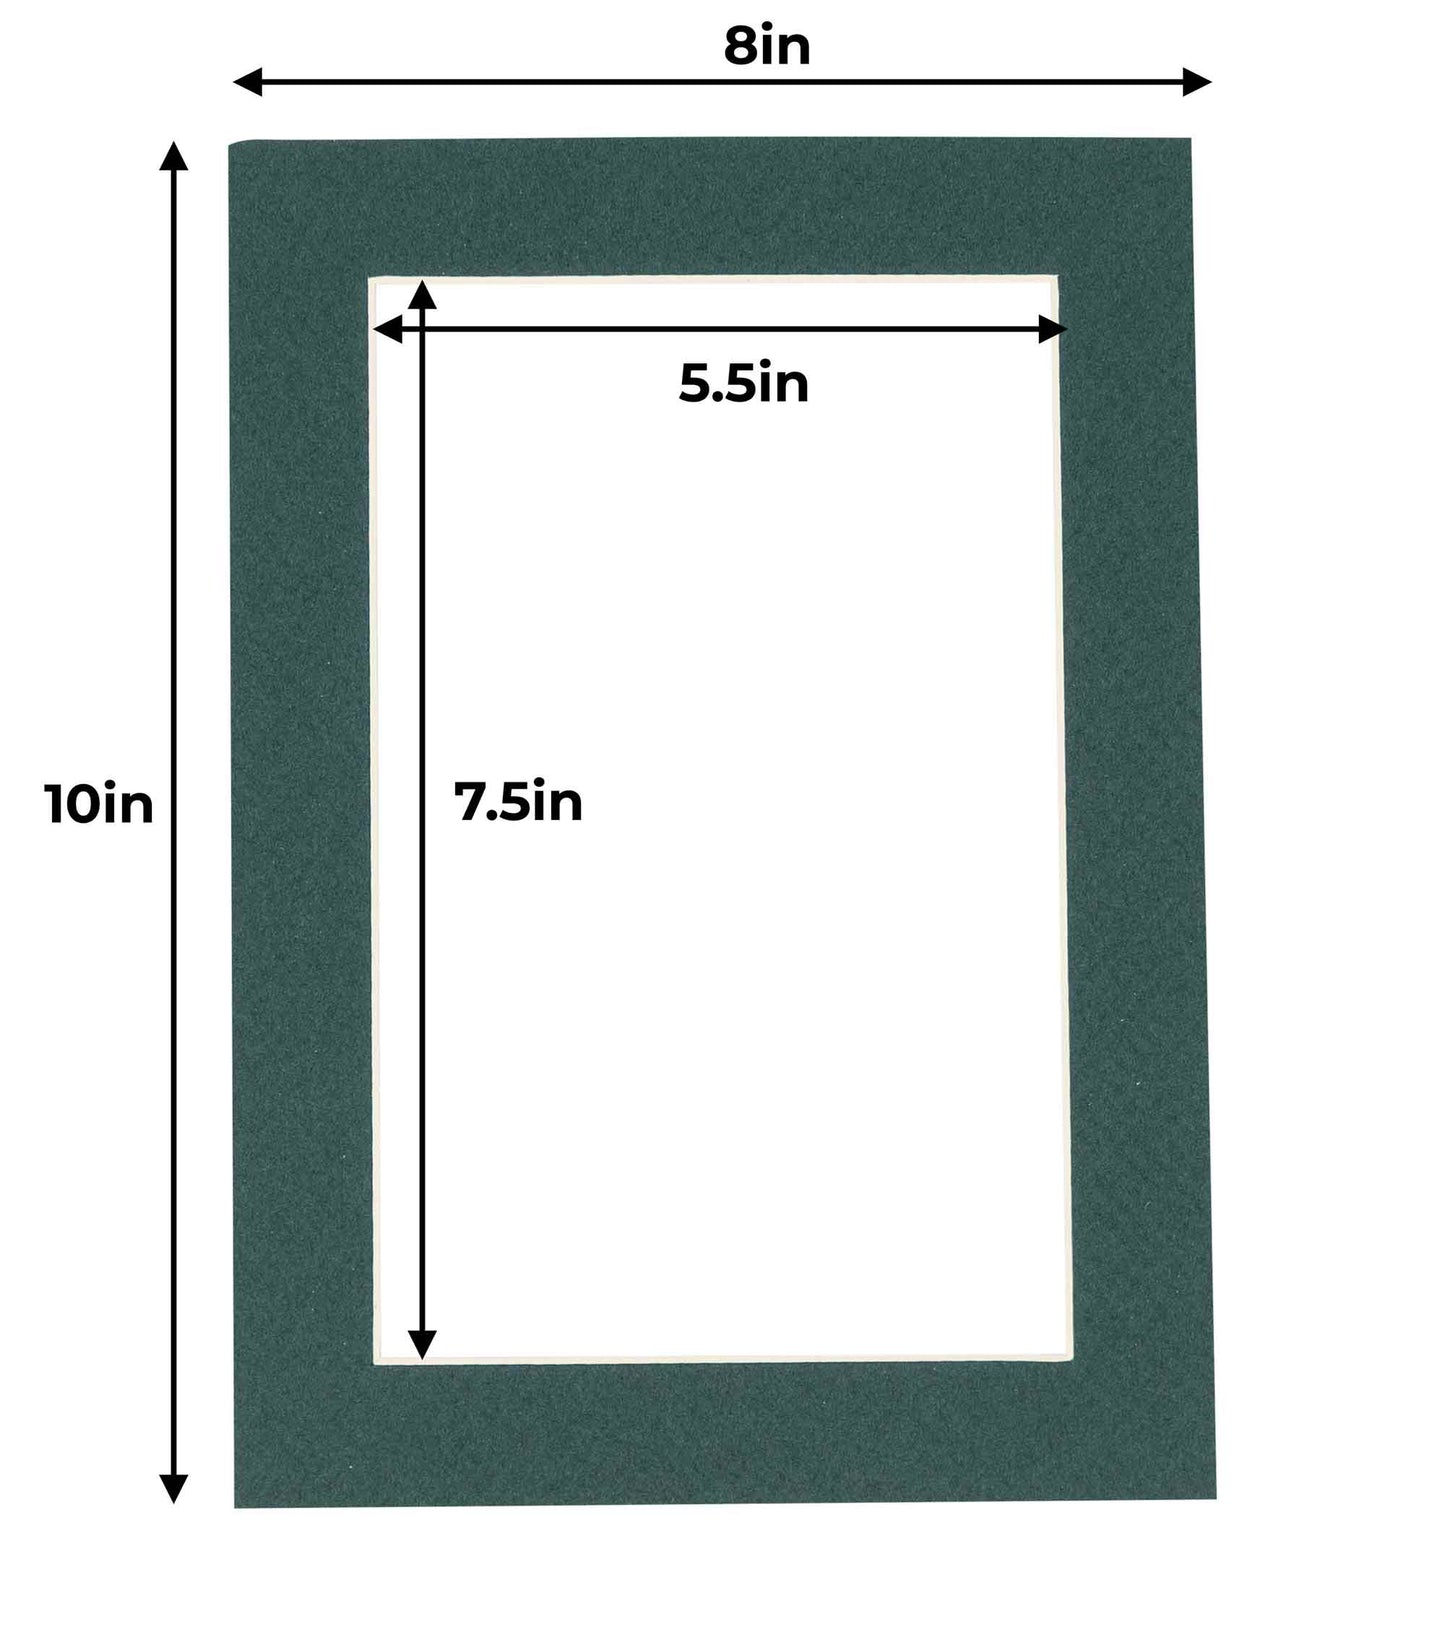 Pack of 10 Forest Green Precut Acid-Free Matboards